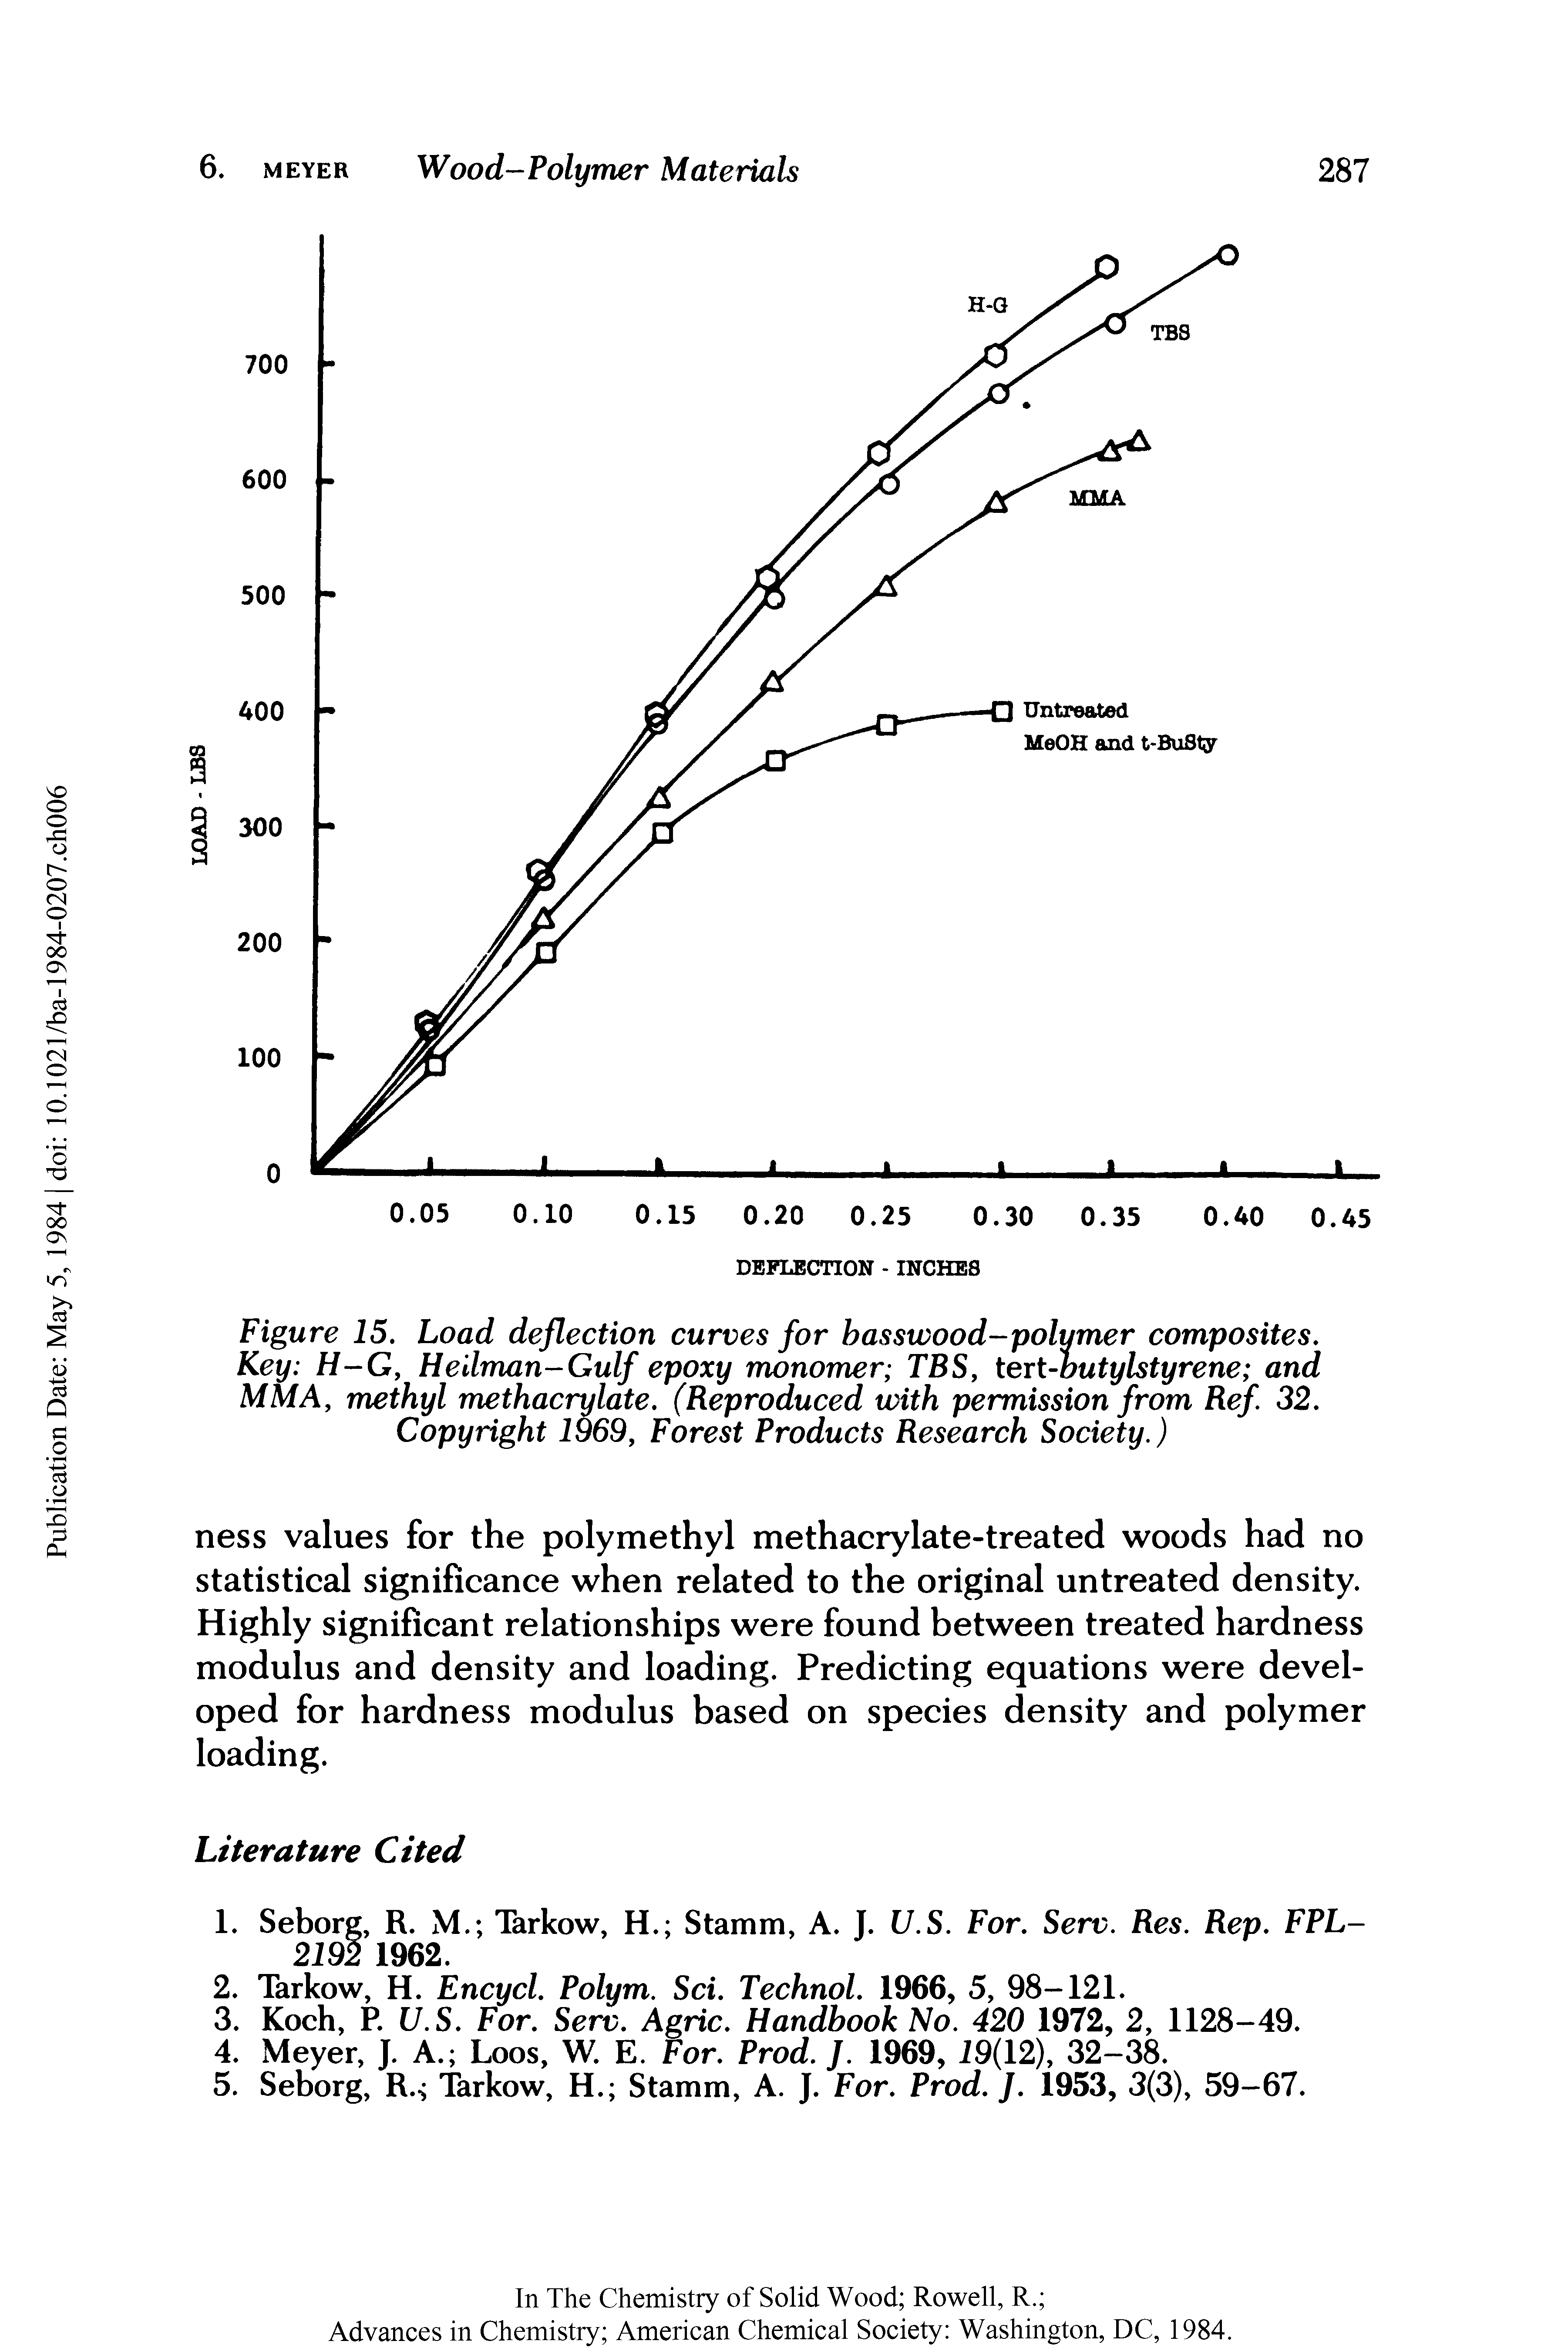 Figure 15. Load deflection curves for hasswood-polymer composites. Key H-G, Heilman-Gulf epoxy monomer TBS, tert-butylstyrene and MMA, methyl methacrylate. (Reproduced with permission from Ref. 32. Copyright 1969, Forest Products Research Society.)...